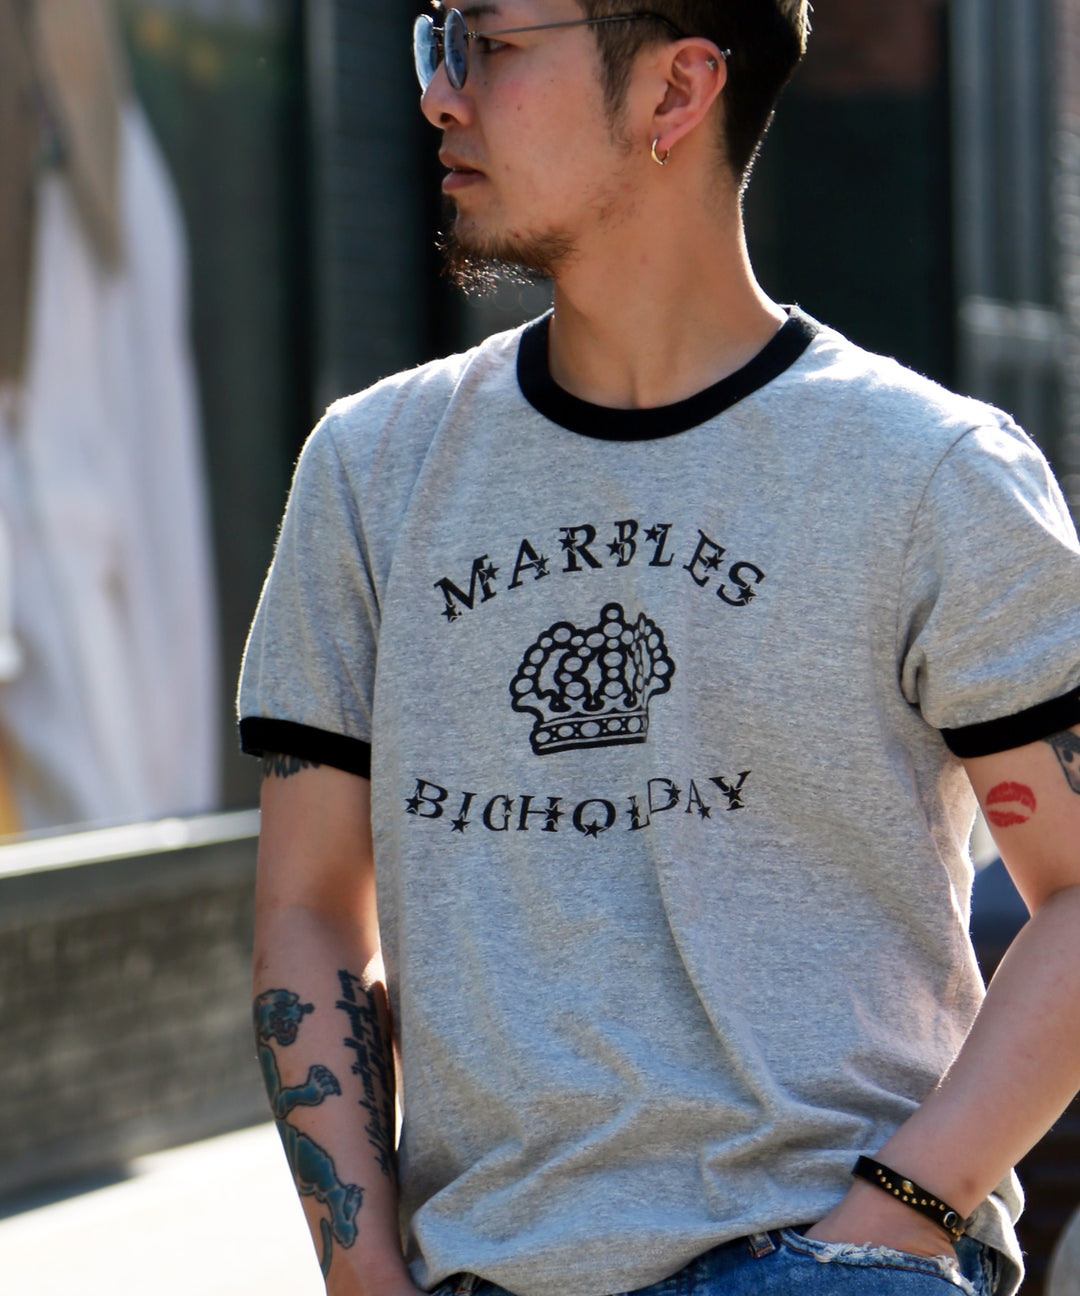 TMT×Marbles S/S RINGER T-SHIRTS(MARBLES BIGHOLIDAY) / TOP GRAY